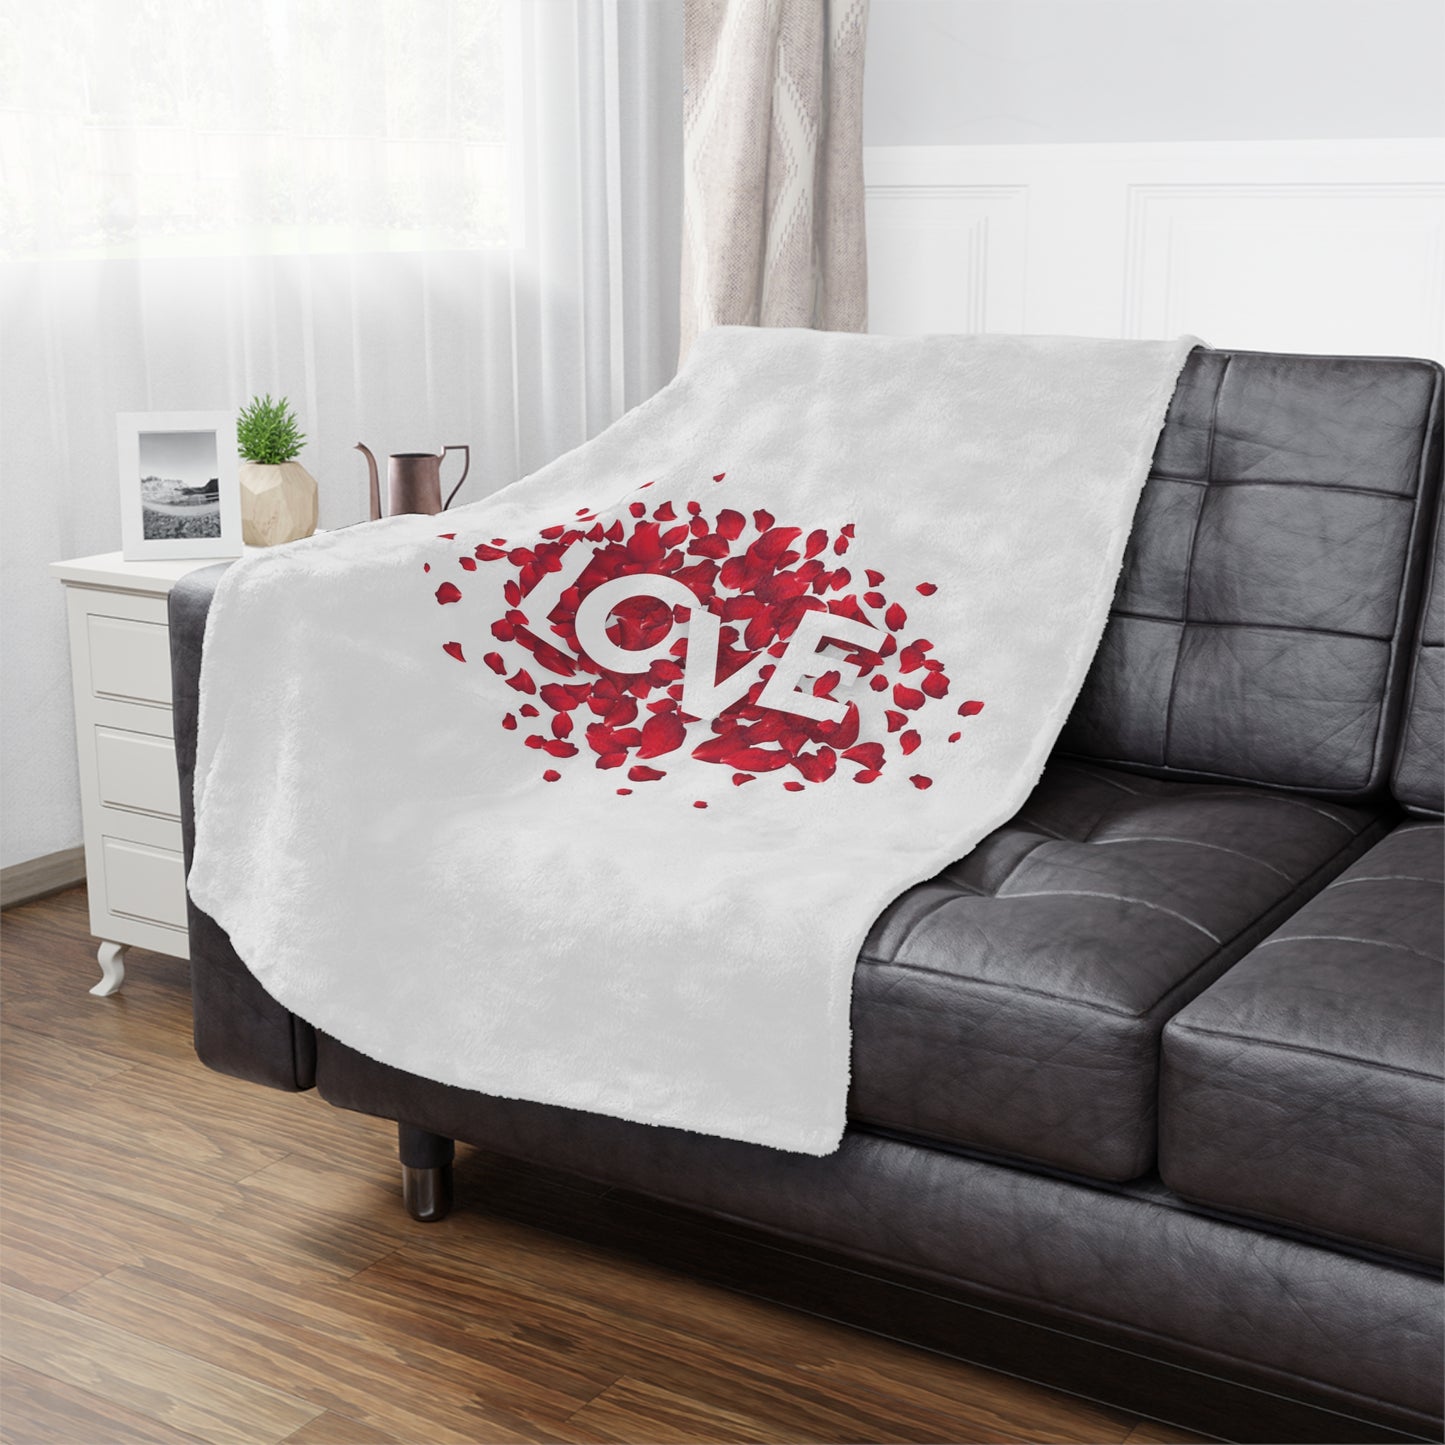 Love with Heart made of Flower Printed Valentine Minky Blanket, White & Red